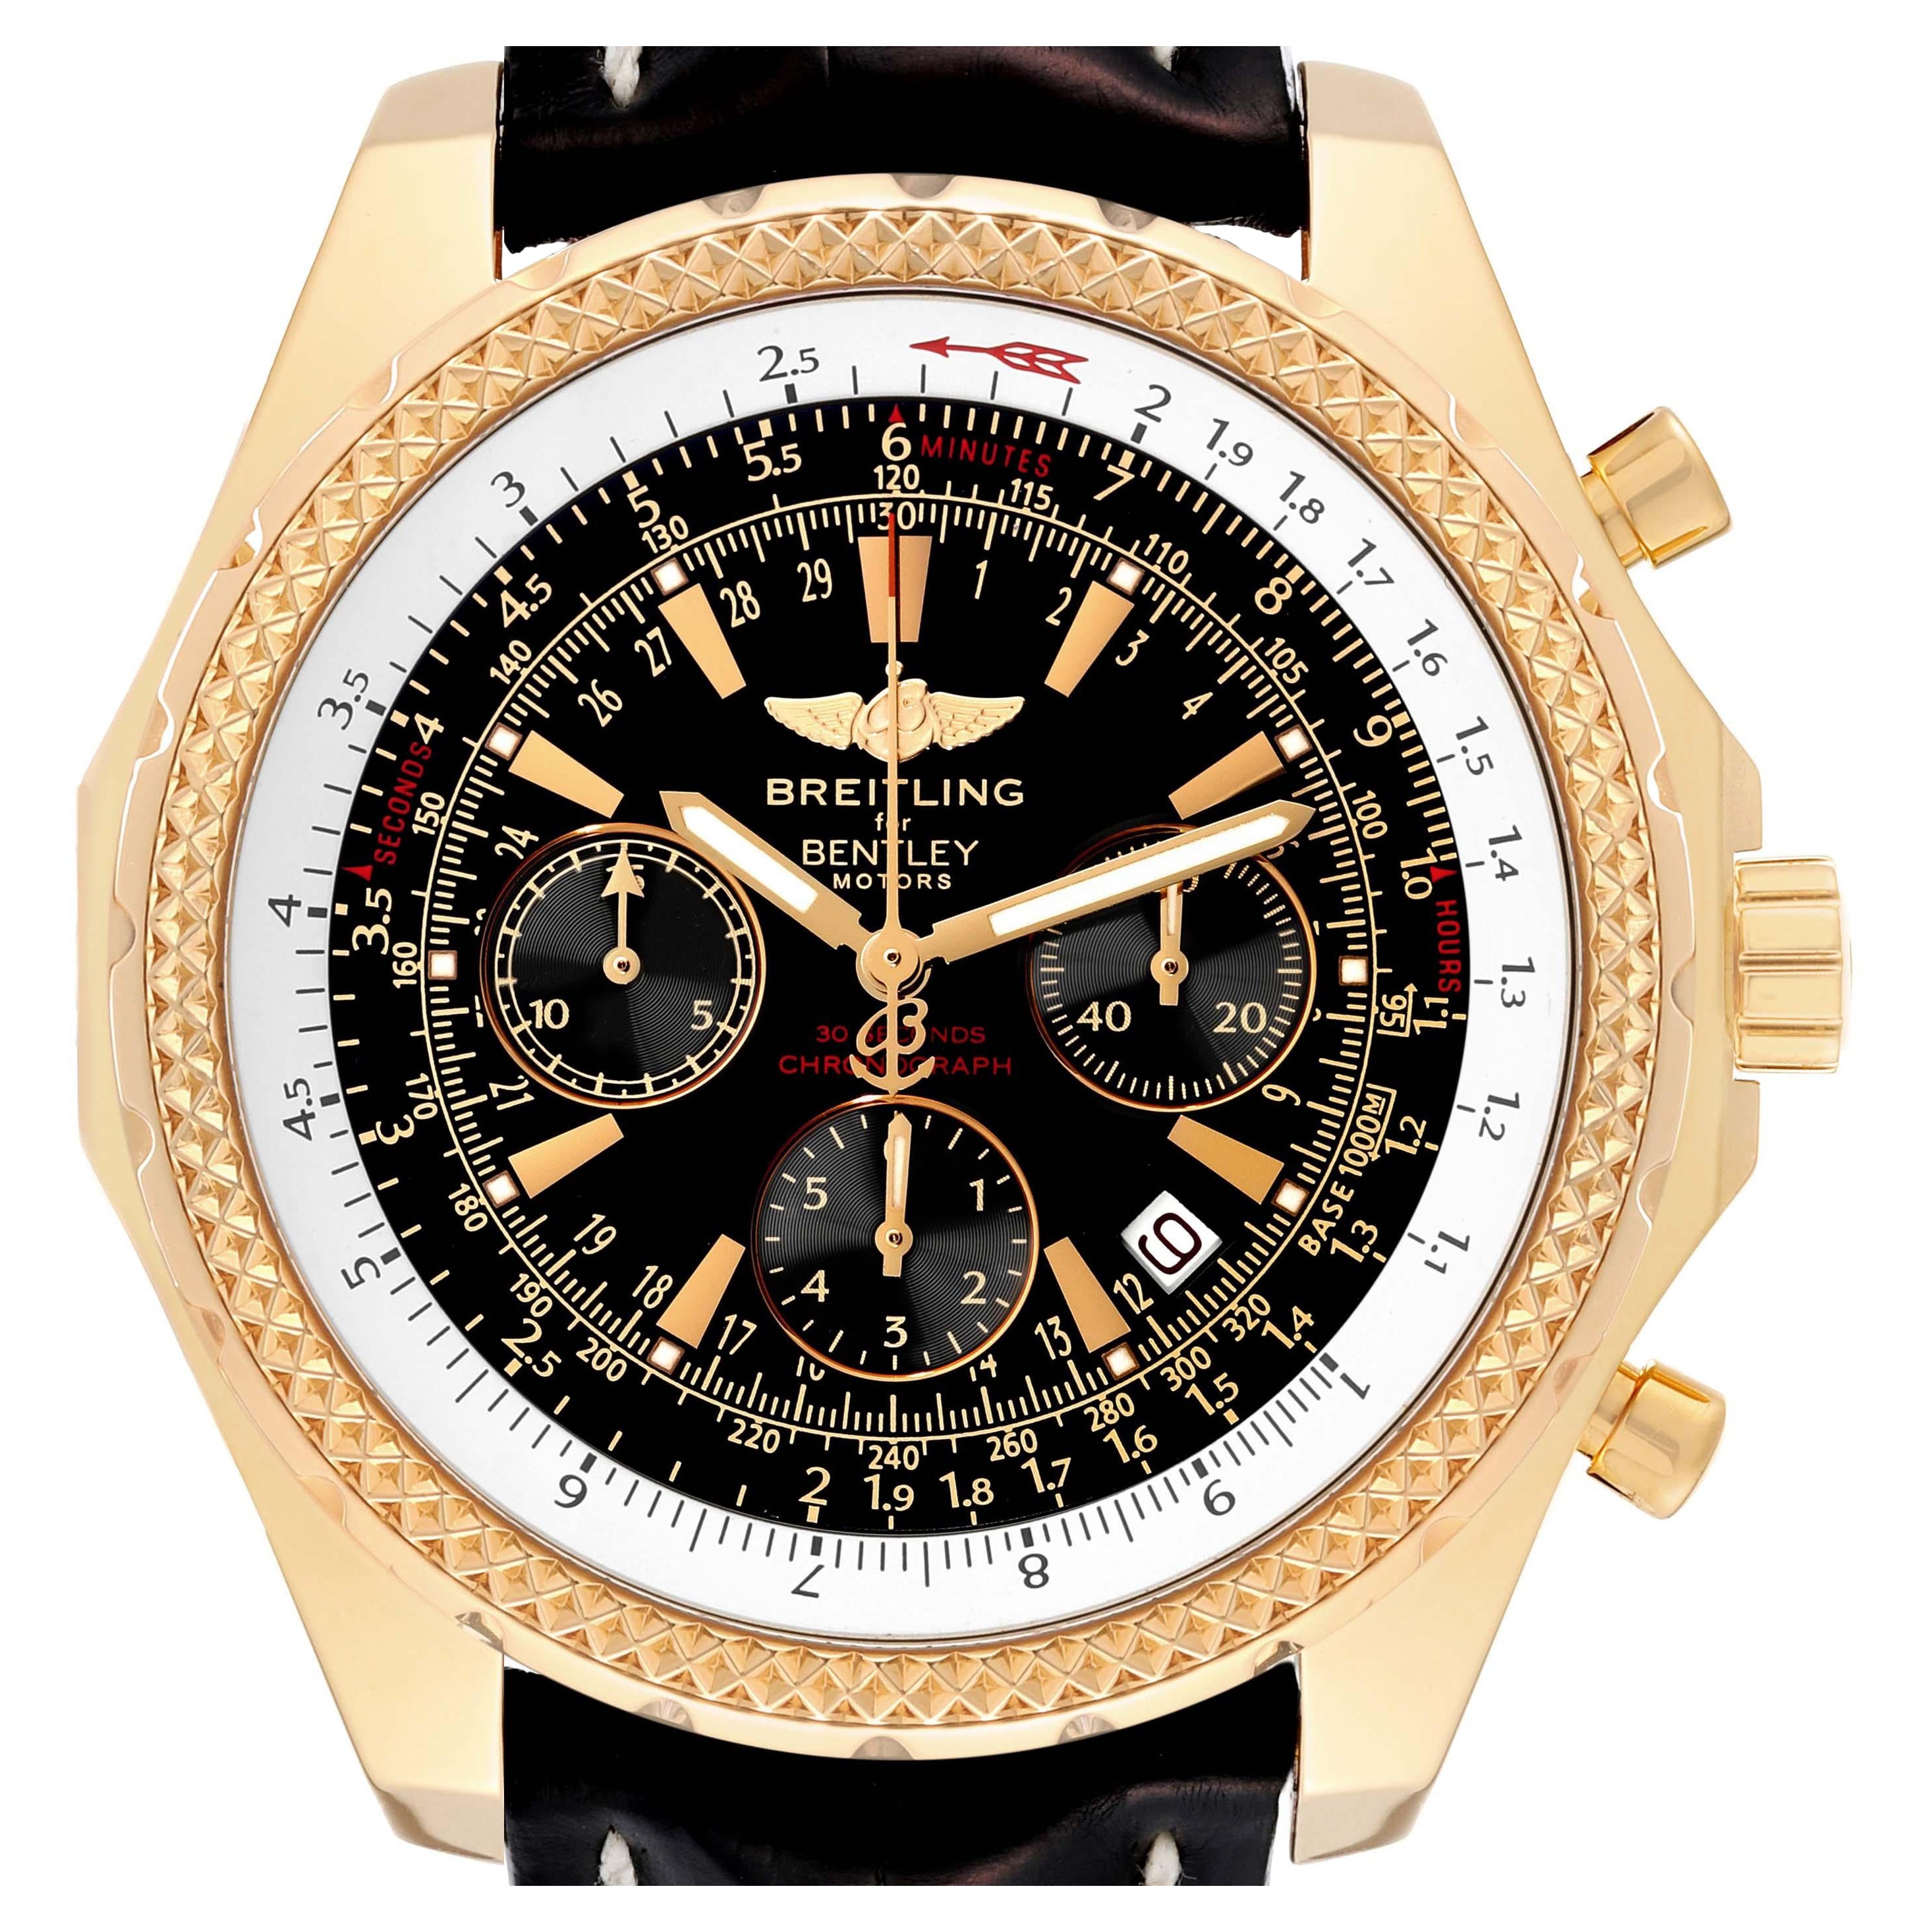 Breitling Bentley Yellow Gold Black Dial Chronograph Mens Watch K25362 For Sale